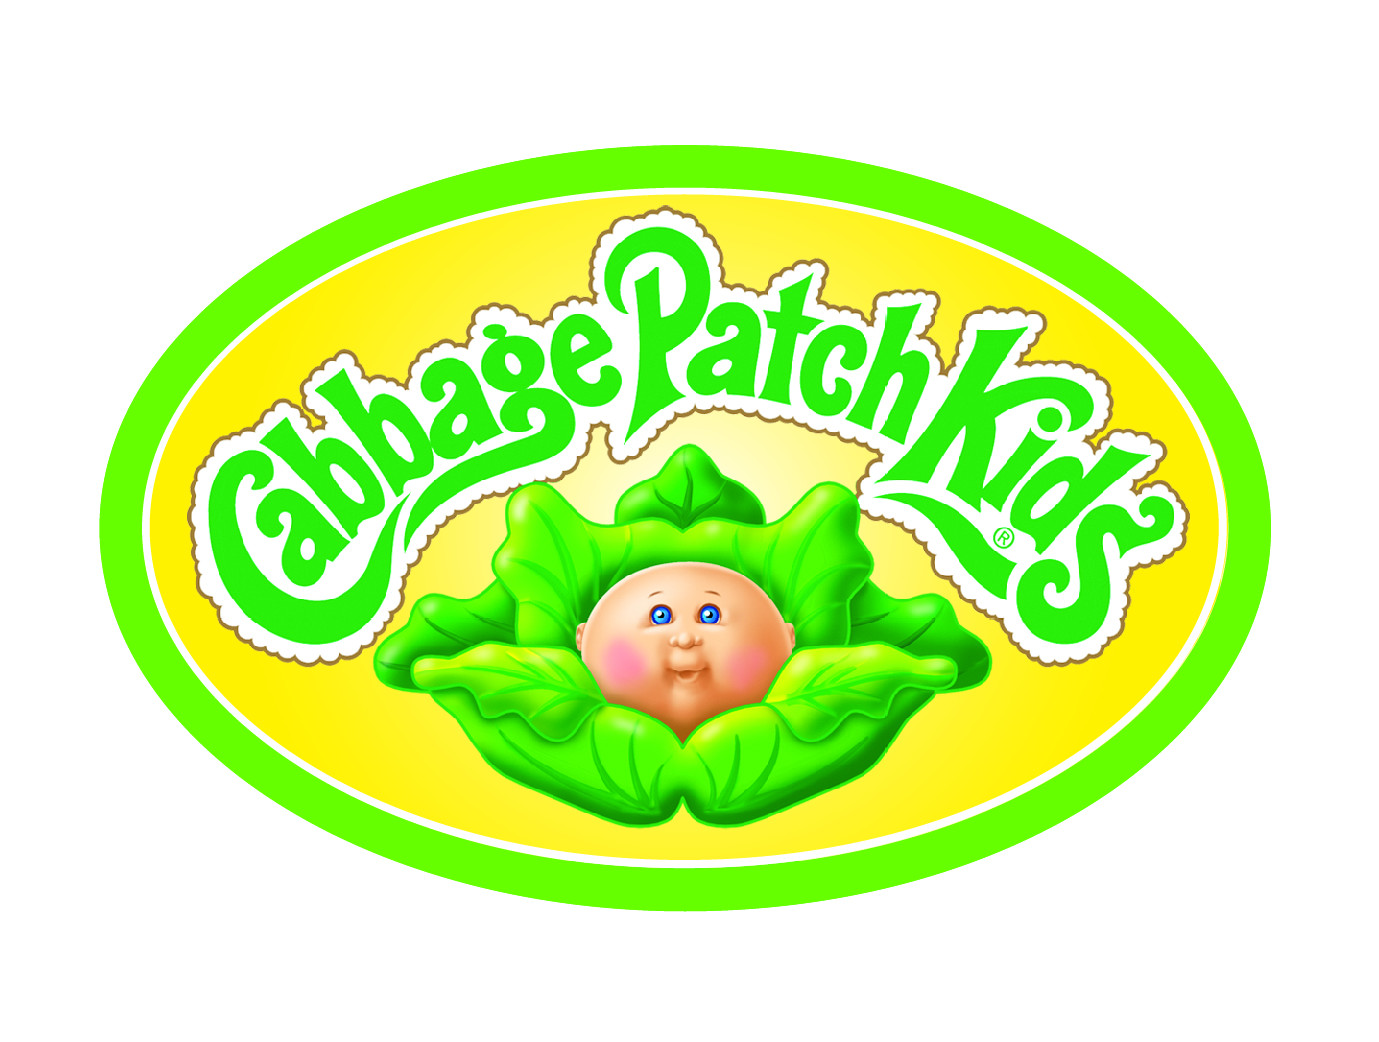 Cabbage Patch Kids Logo
 Cabbage Patch Kids Naptime Babies e of a Kind Baby Doll